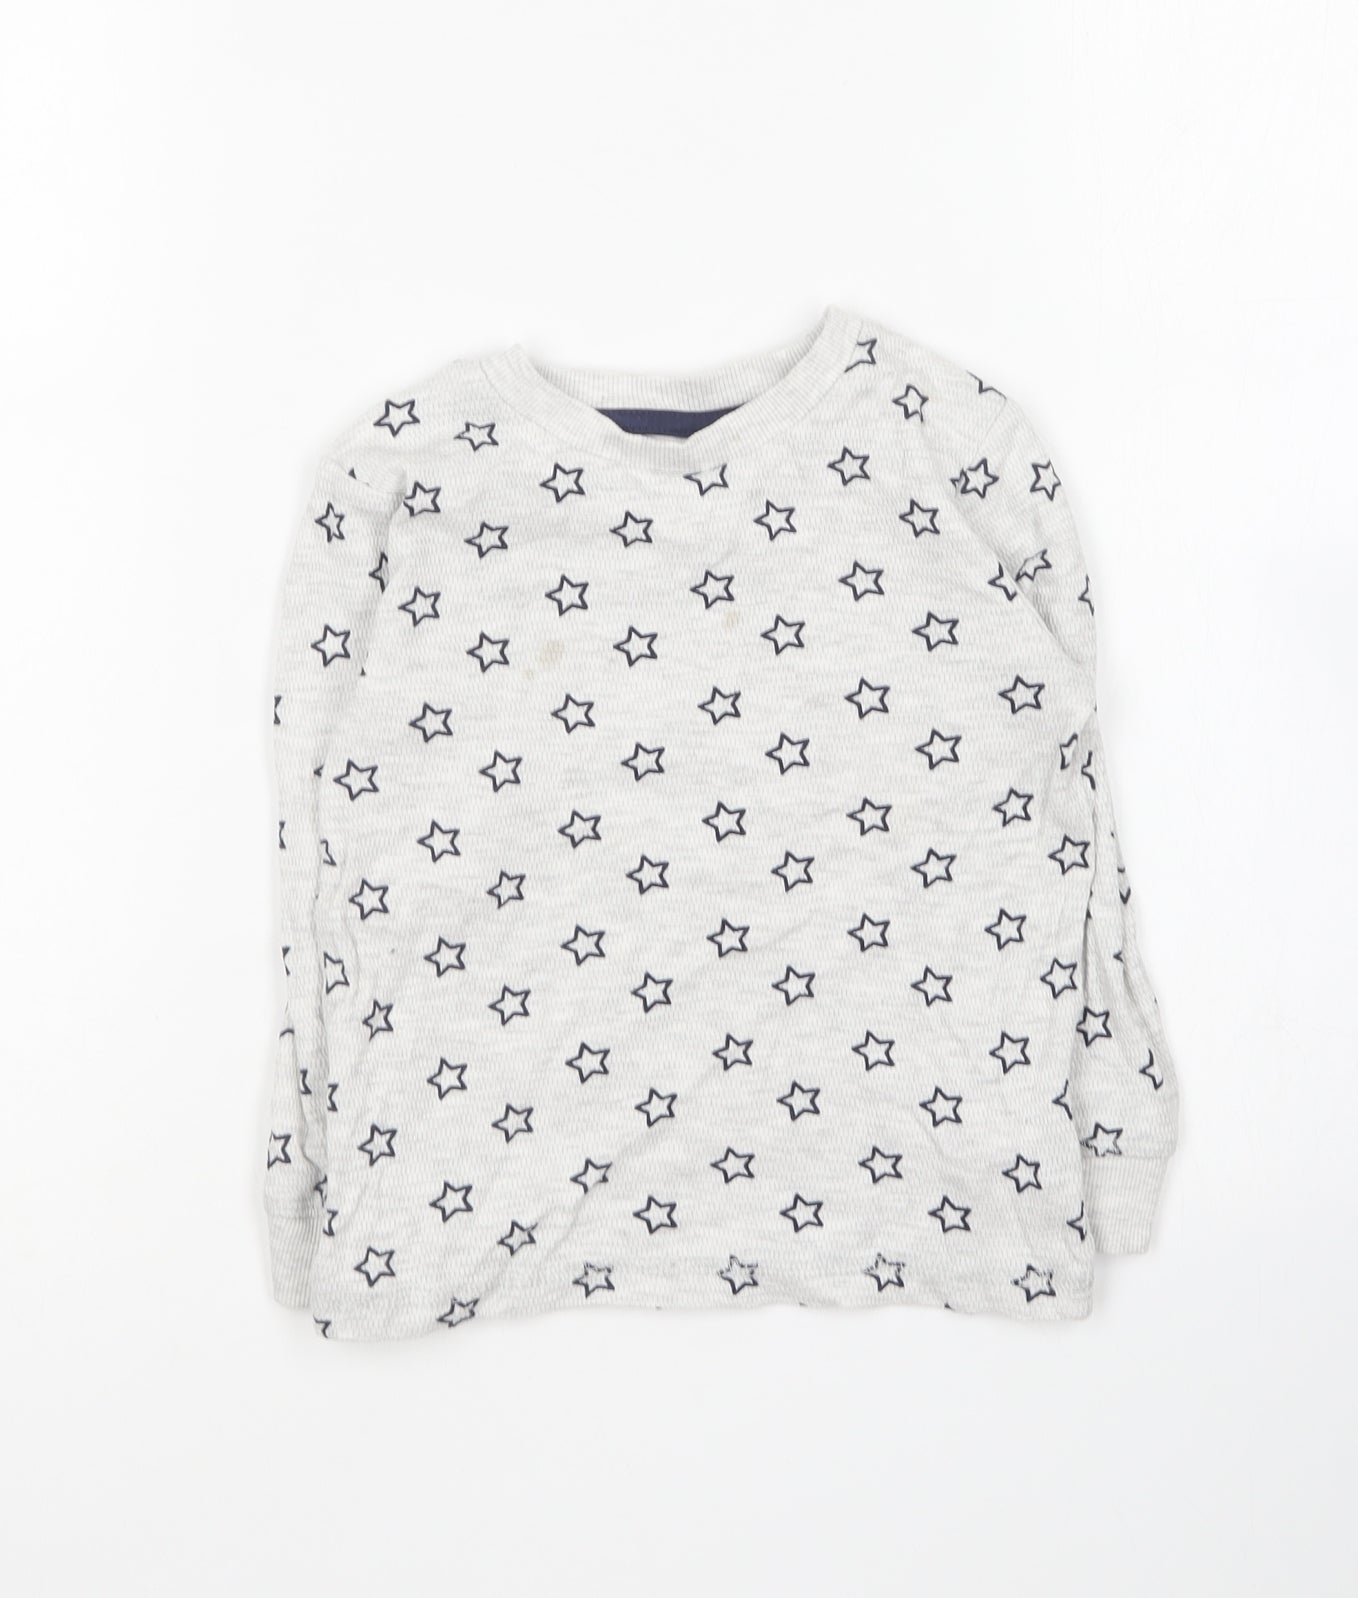 Dunnes Stores Boys Grey Round Neck Geometric Cotton Pullover Jumper Size 3-4 Years - Star print